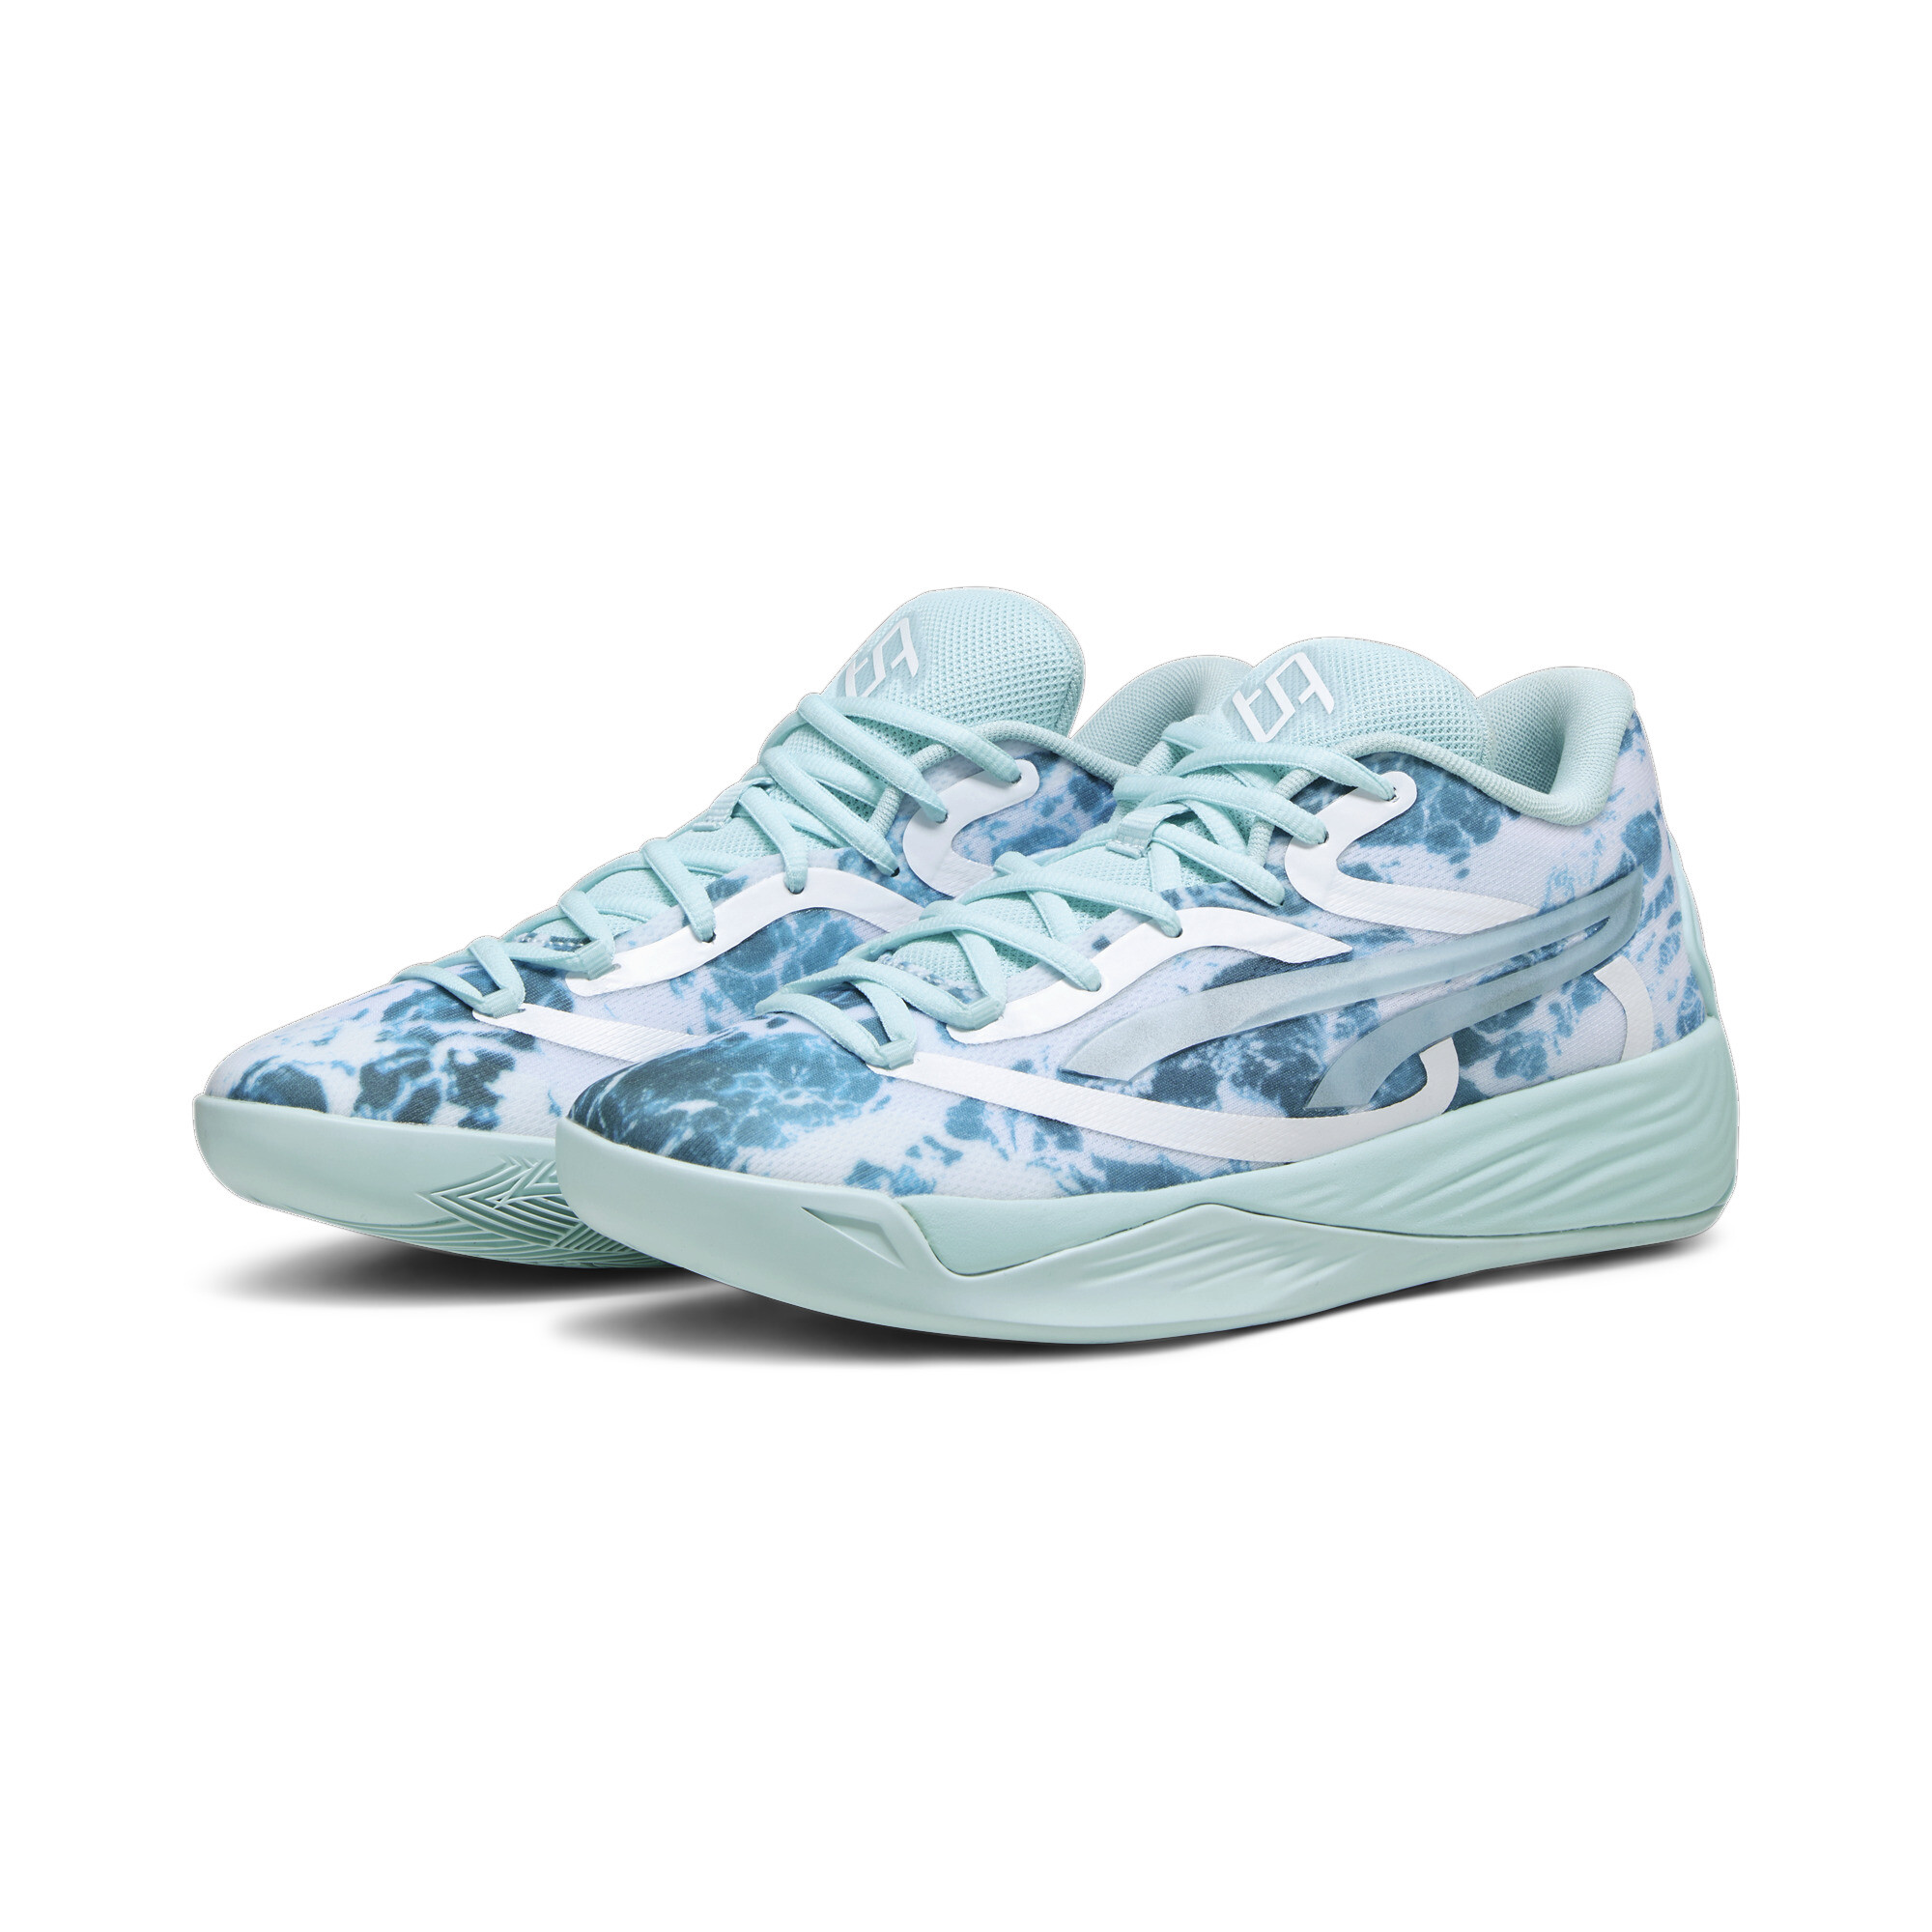 Women's Puma Stewie 2 Water's Basketball Shoes, Blue, Size 39, Shoes